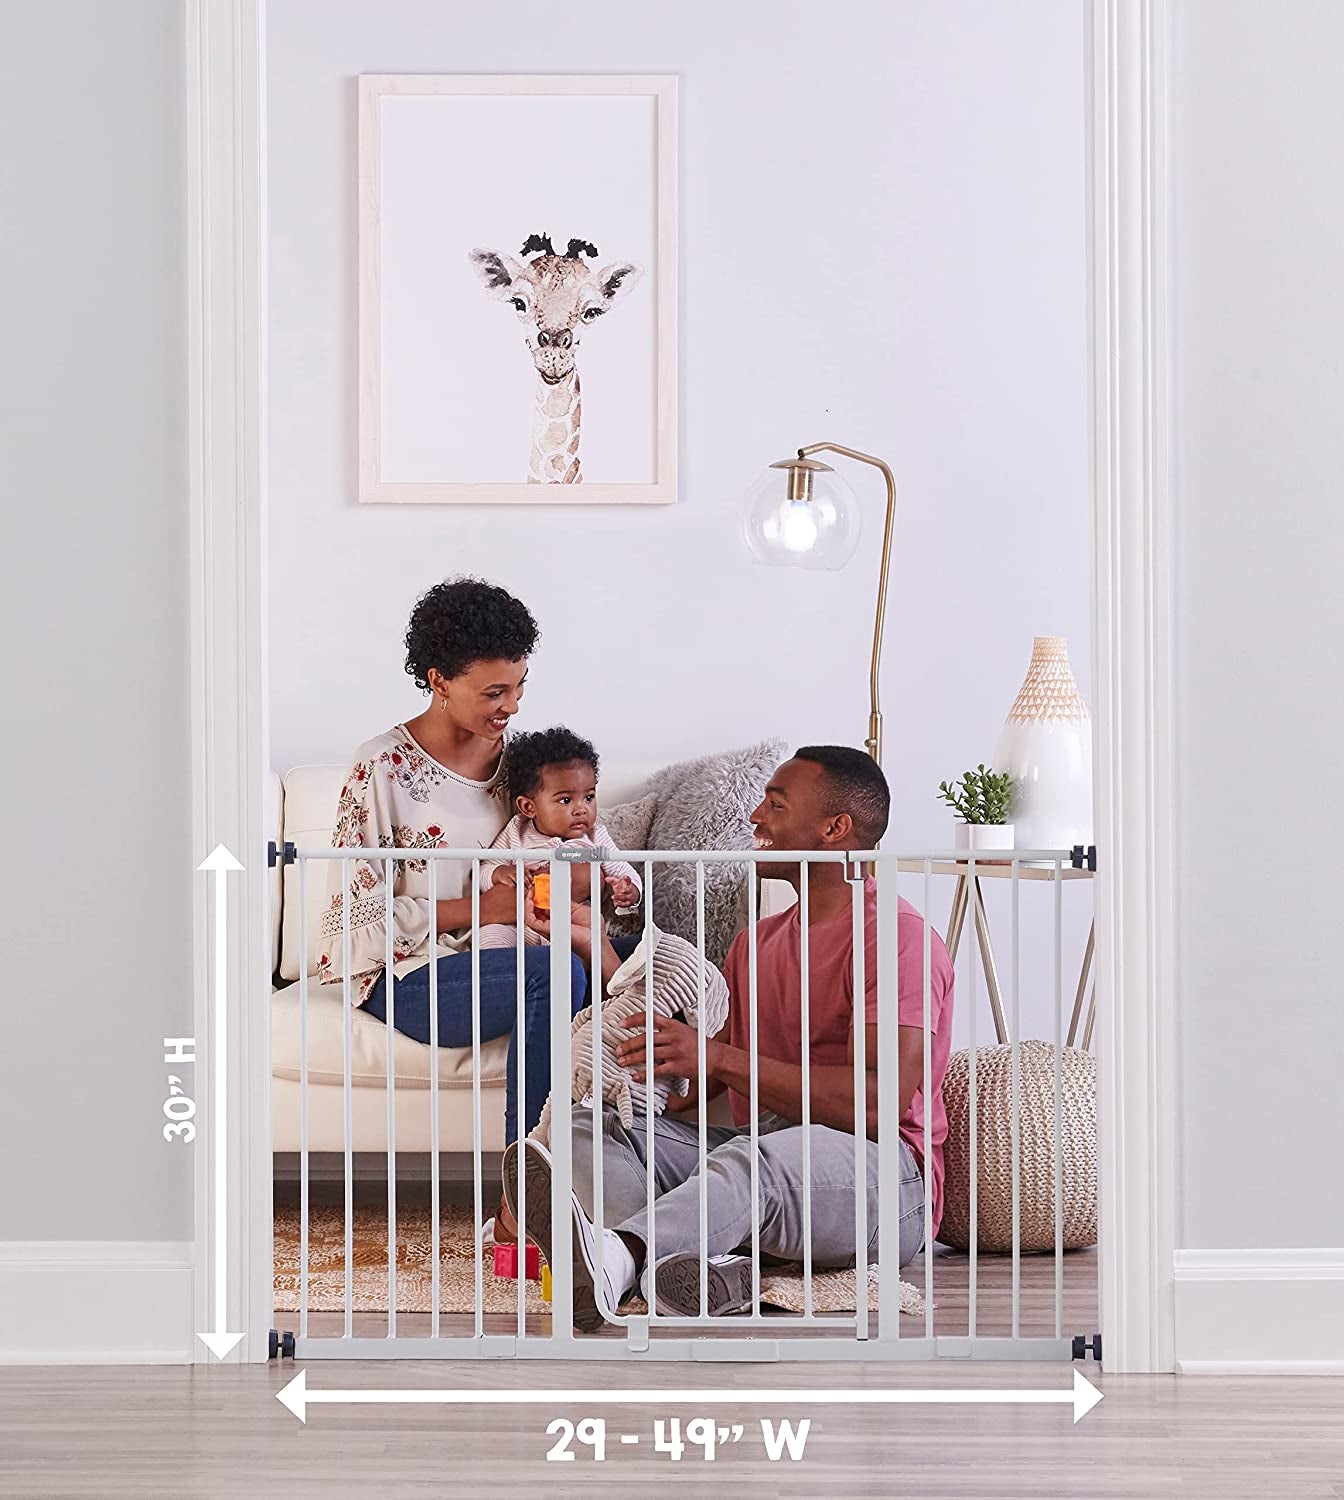 Easy Open 47-Inch Super Wide Walk Thru Baby Gate, Bonus Kit, Includes 4-Inch and 12-Inch Extension Kit, 4 Pack Pressure Mount Kit and 4 Wall Cups and Mounting Kit , 11 Count (Pack of 1),White